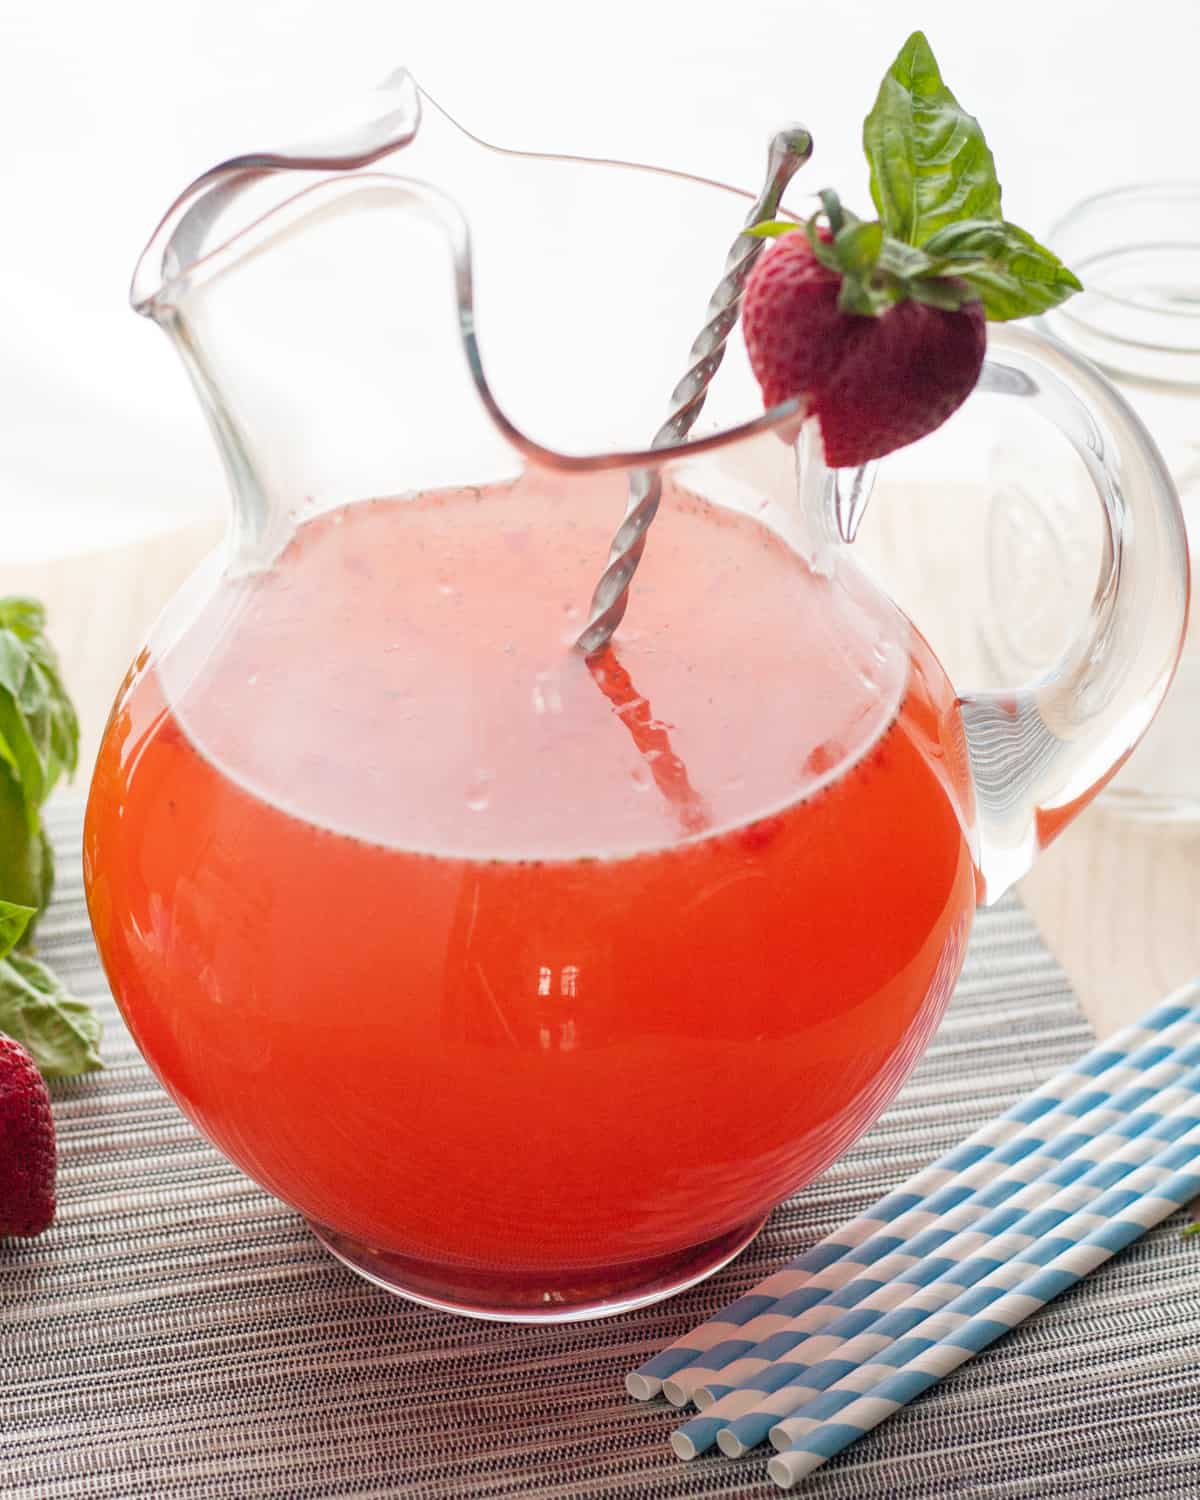 Strawberry Basil Lemonade is a delicious non-alcoholic lemonade recipe perfect for summer. Naturally flavored with fresh fruits and herbs! * Recipe on GoodieGodmother.com